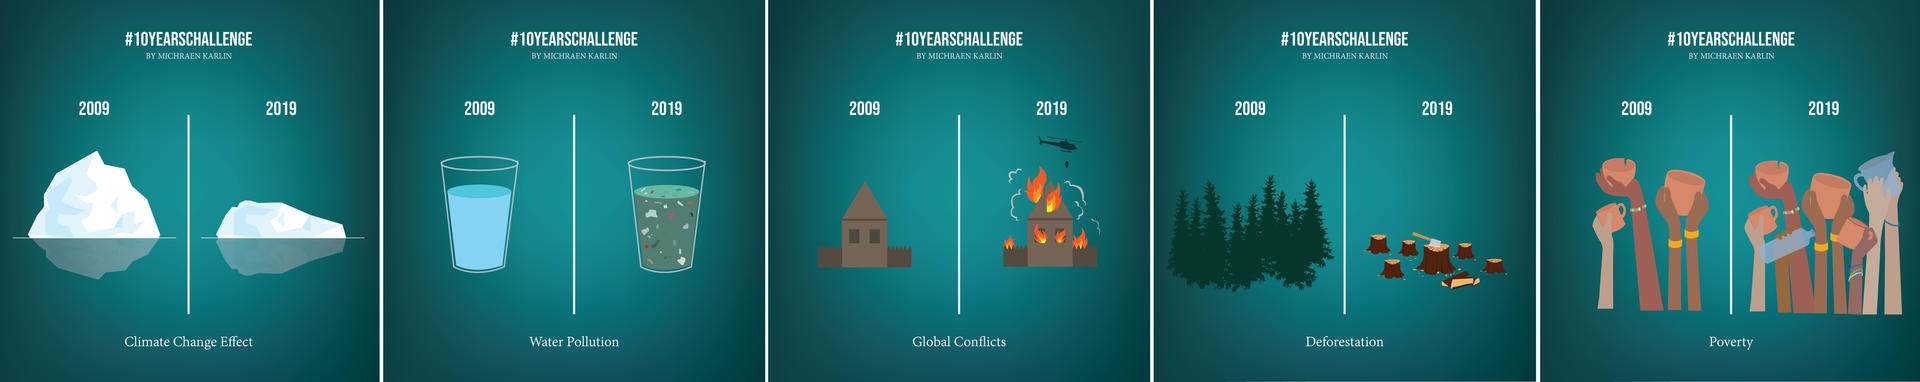 10 Years Challenges